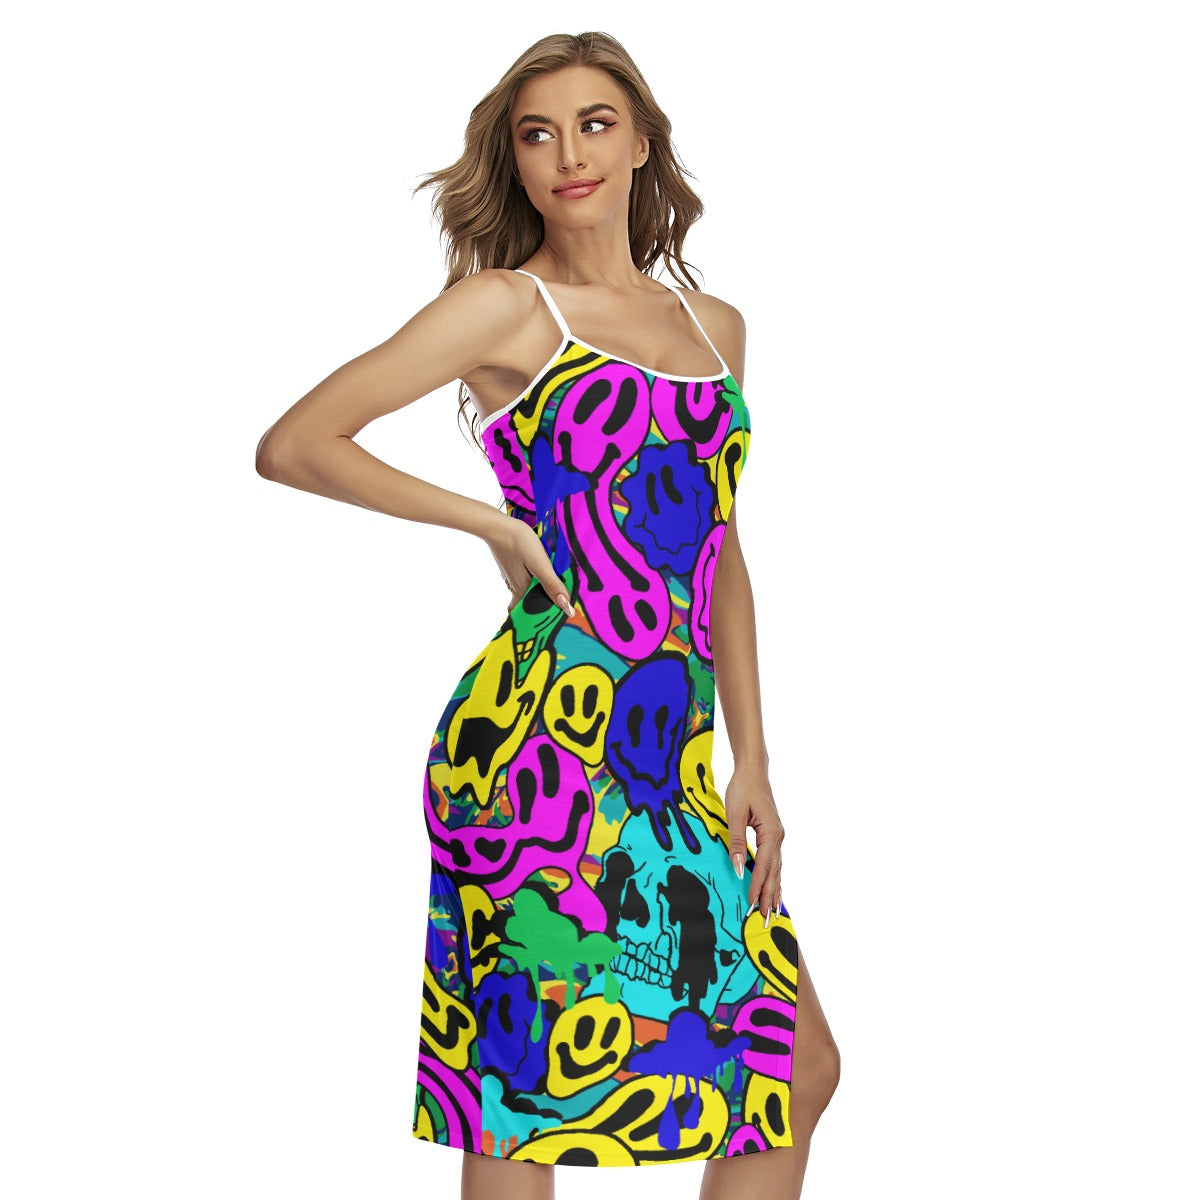 Neon Melted Smiley Bodycon Slip Dress